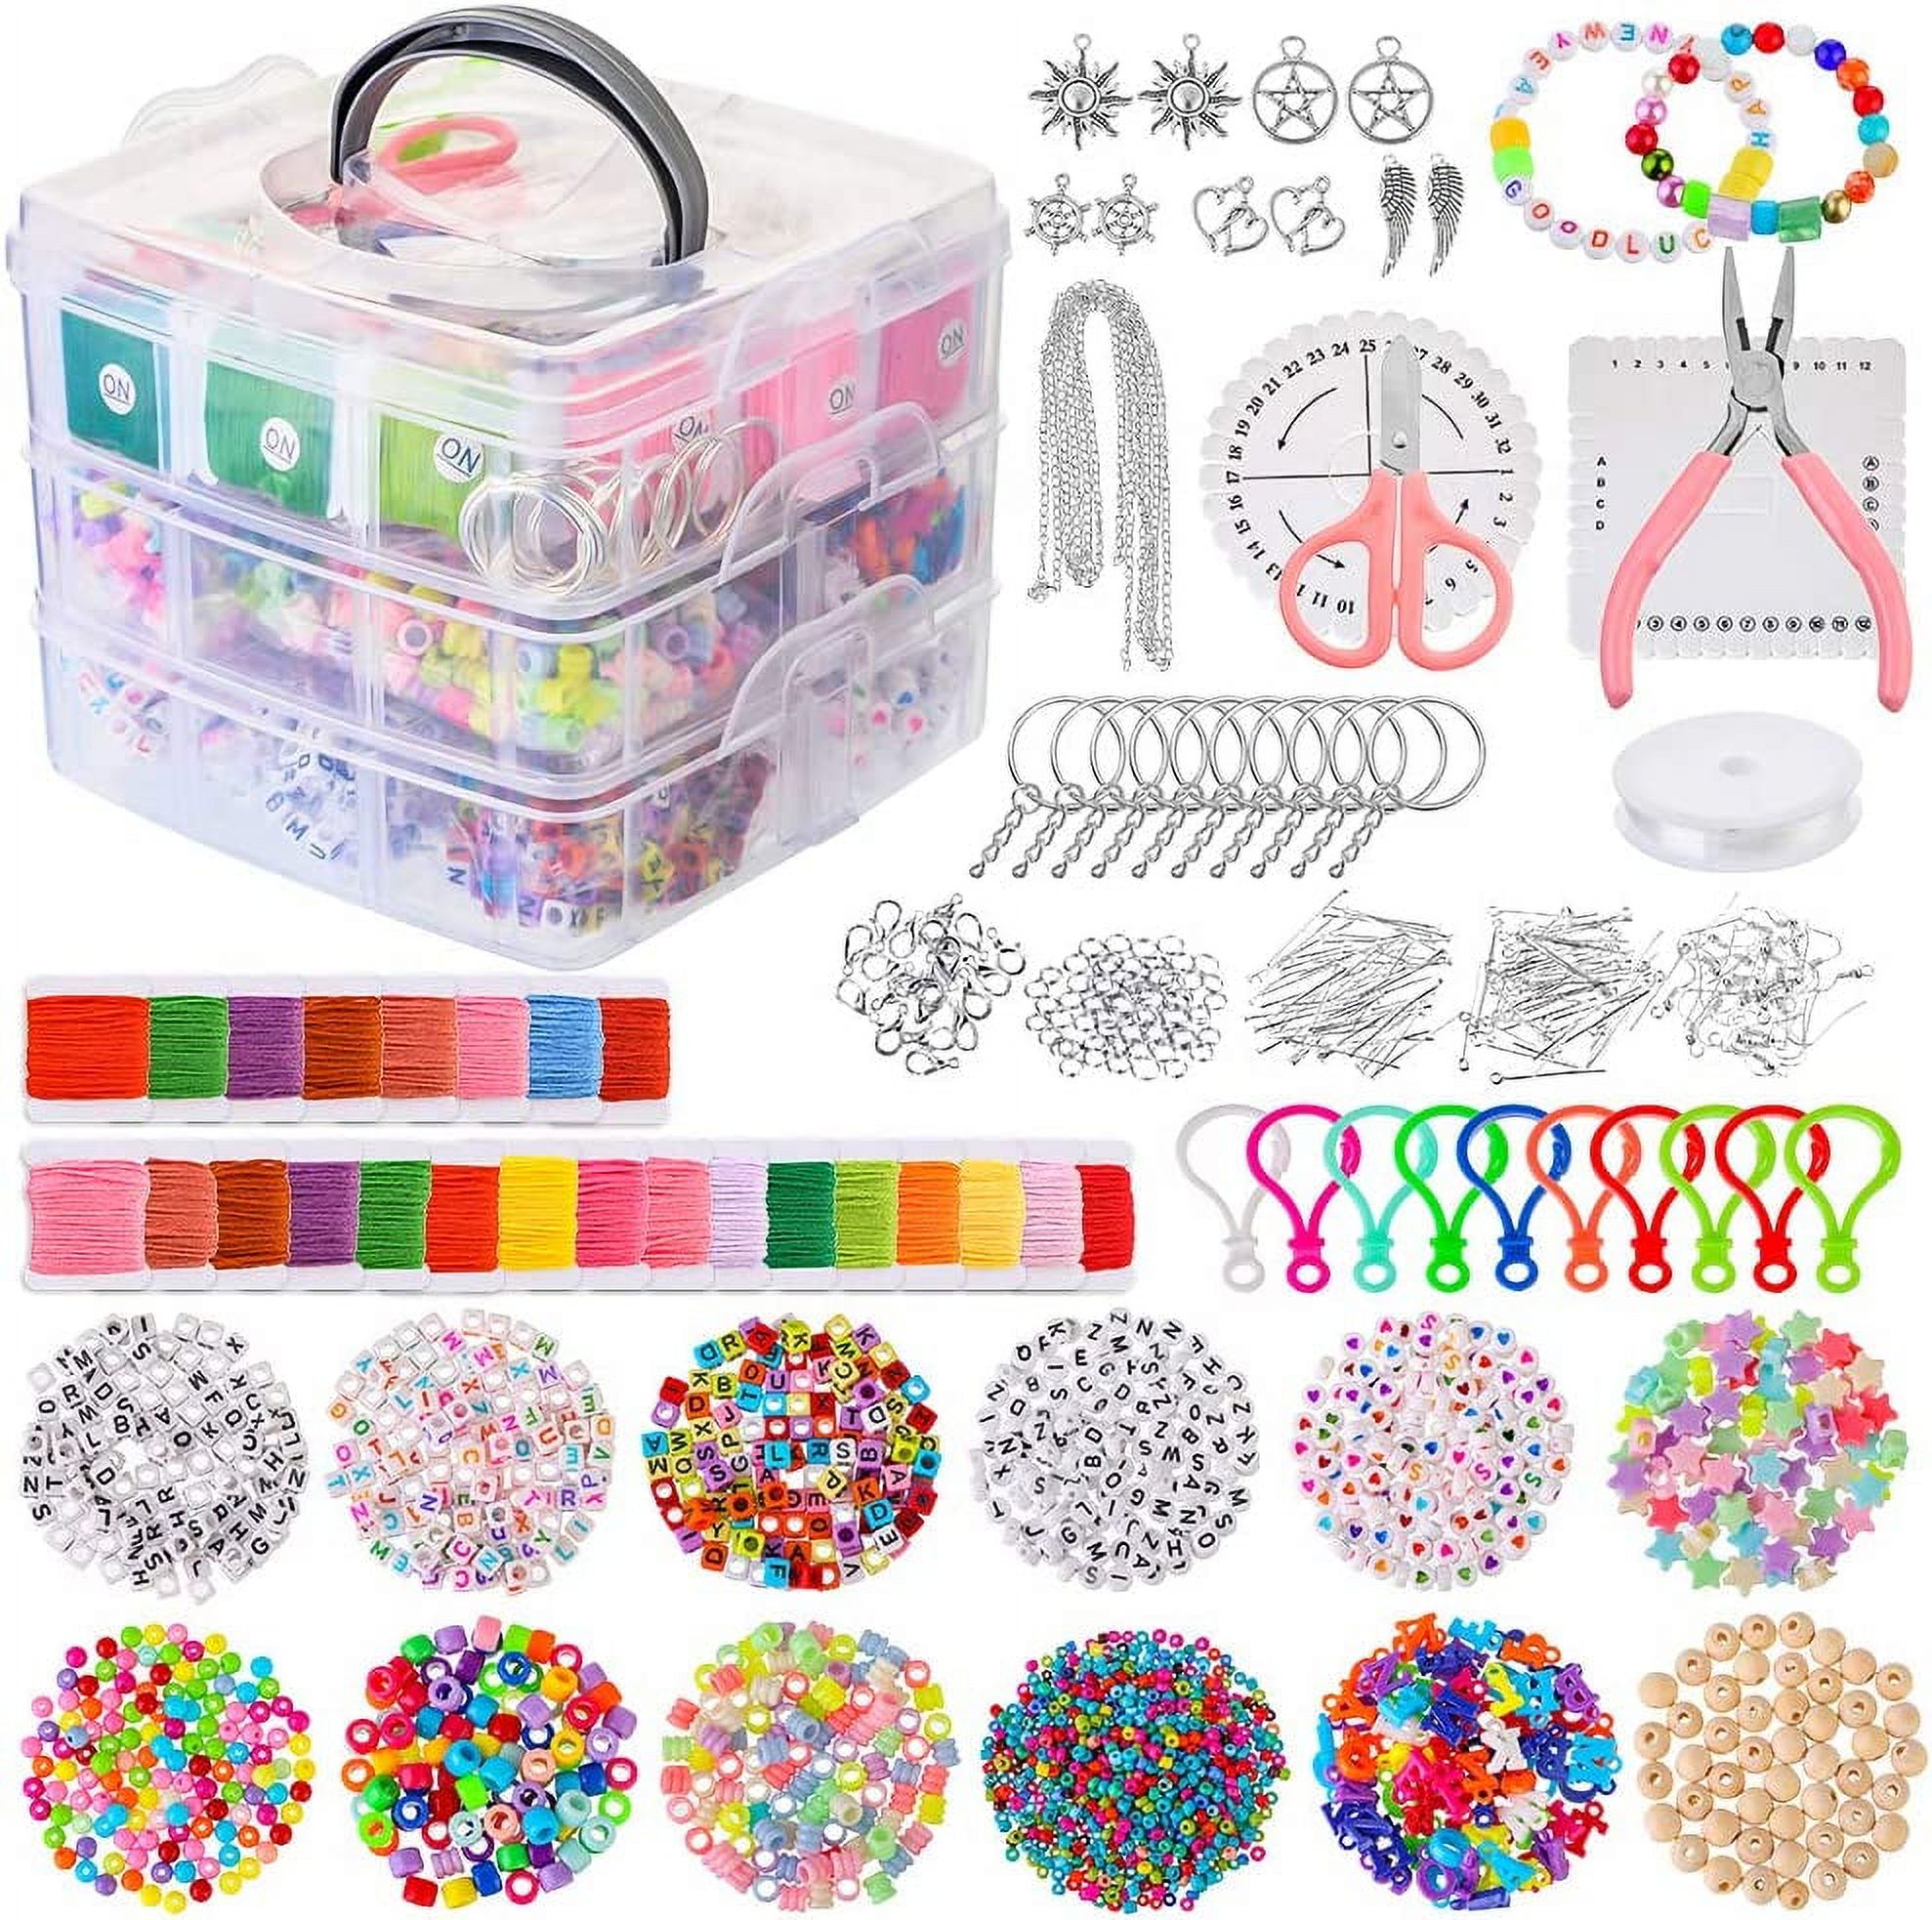 Jewelry Making Kit,Jewelry Making Supplies 4655PCS Include Jewelry Pliers Beading Wire Beads Charms Findings for Necklace Earring Bracelet Repair Jewelry Making Tools Kits for Adults Women - image 1 of 9